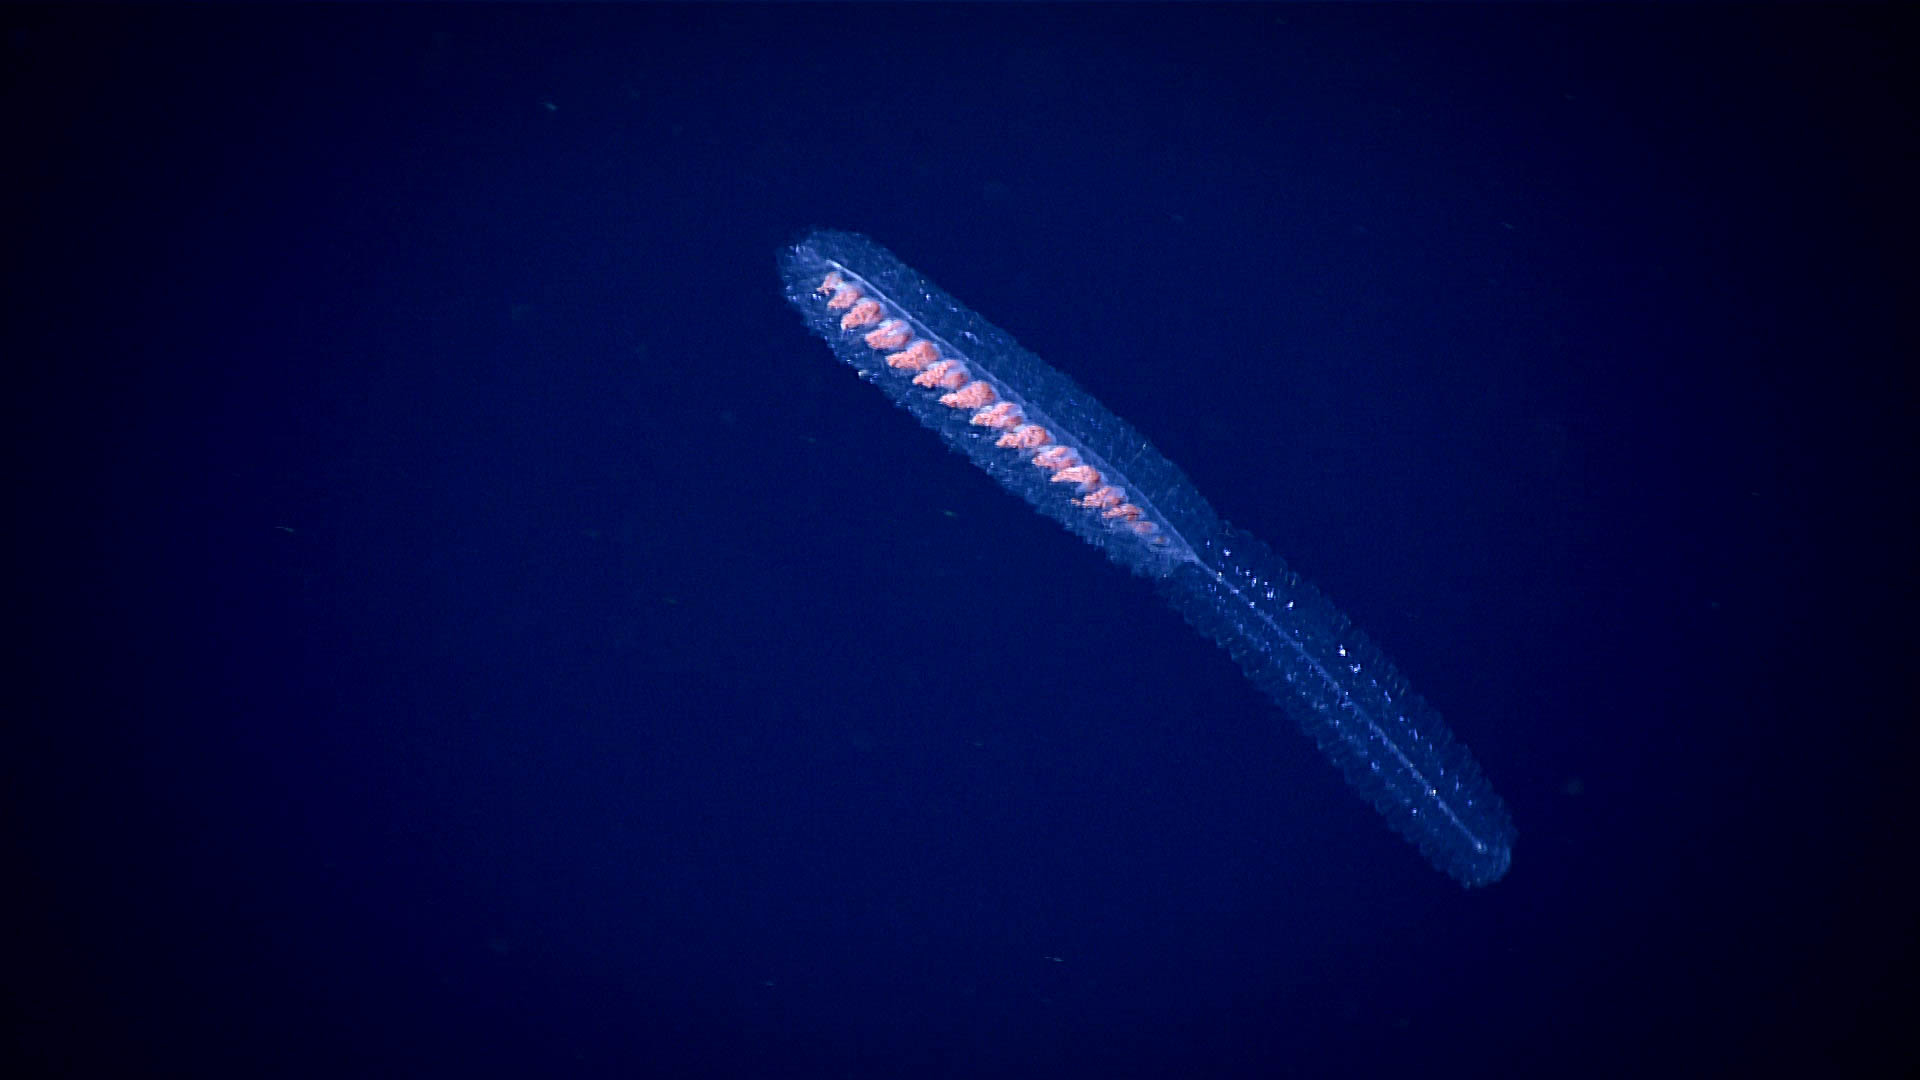 Siphonophores are commonly observed in the water column. This individual was seen at a depth of approximately 400 meters (1,310 feet) in the Gulf of Mexico.